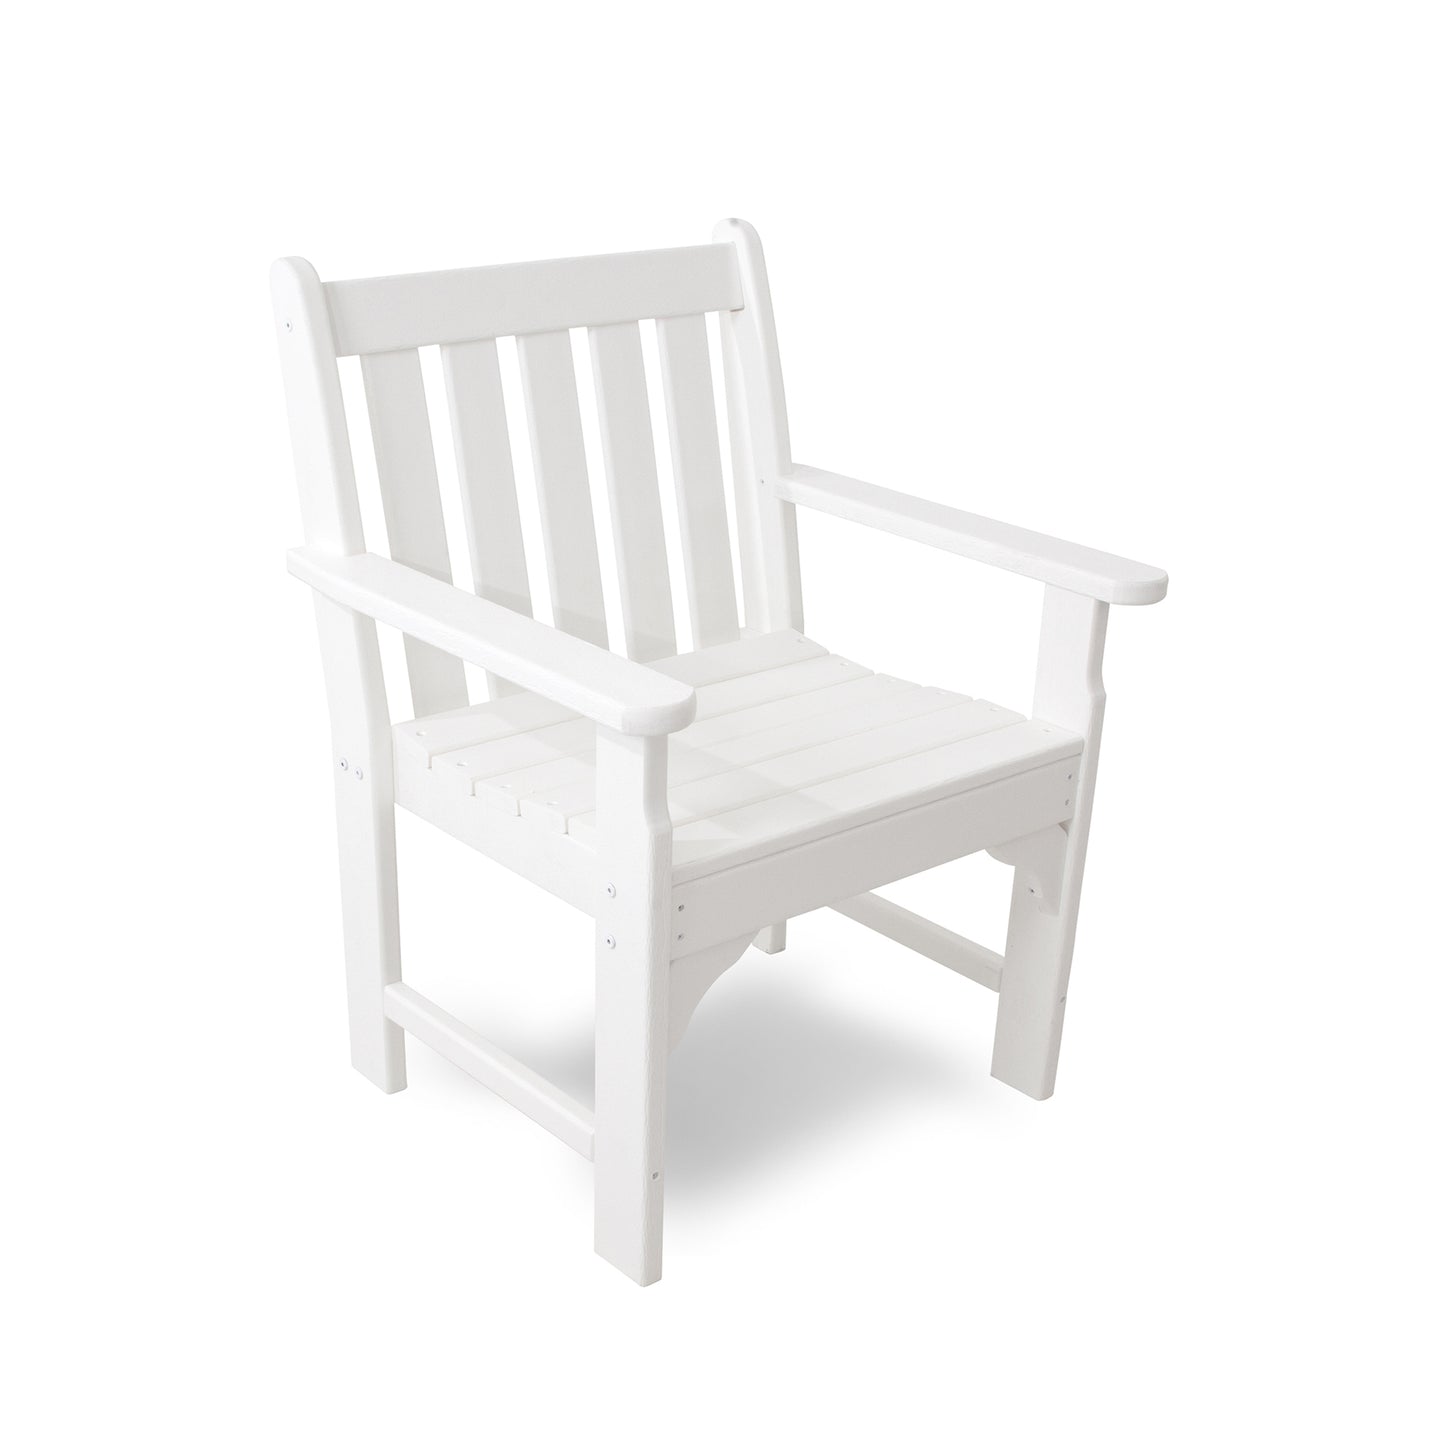 A white POLYWOOD Vineyard Arm Chair with a straight back and armrests, isolated on a white background.